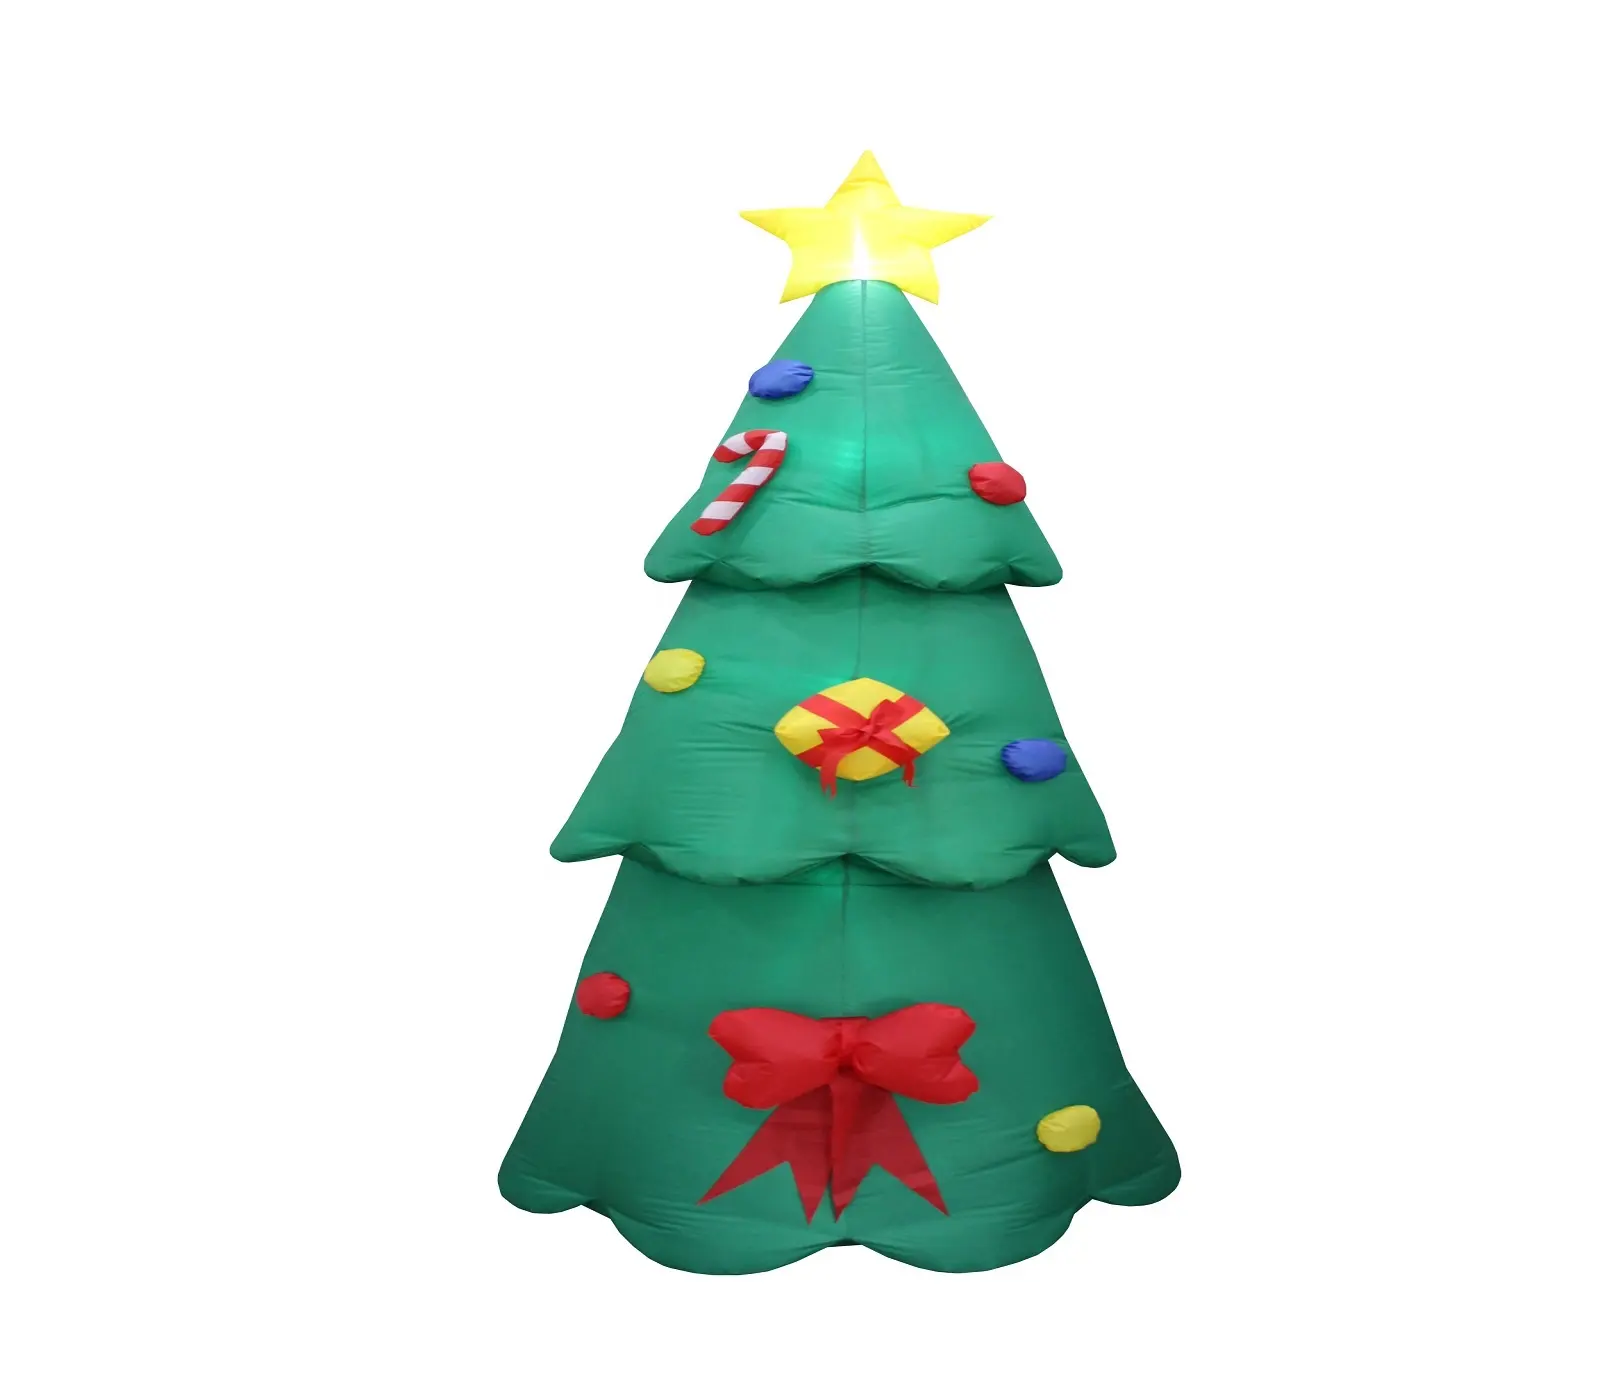 240cm/8ft inflatable Xmas tree in 3 layers with red bowtie for Christmas decoration